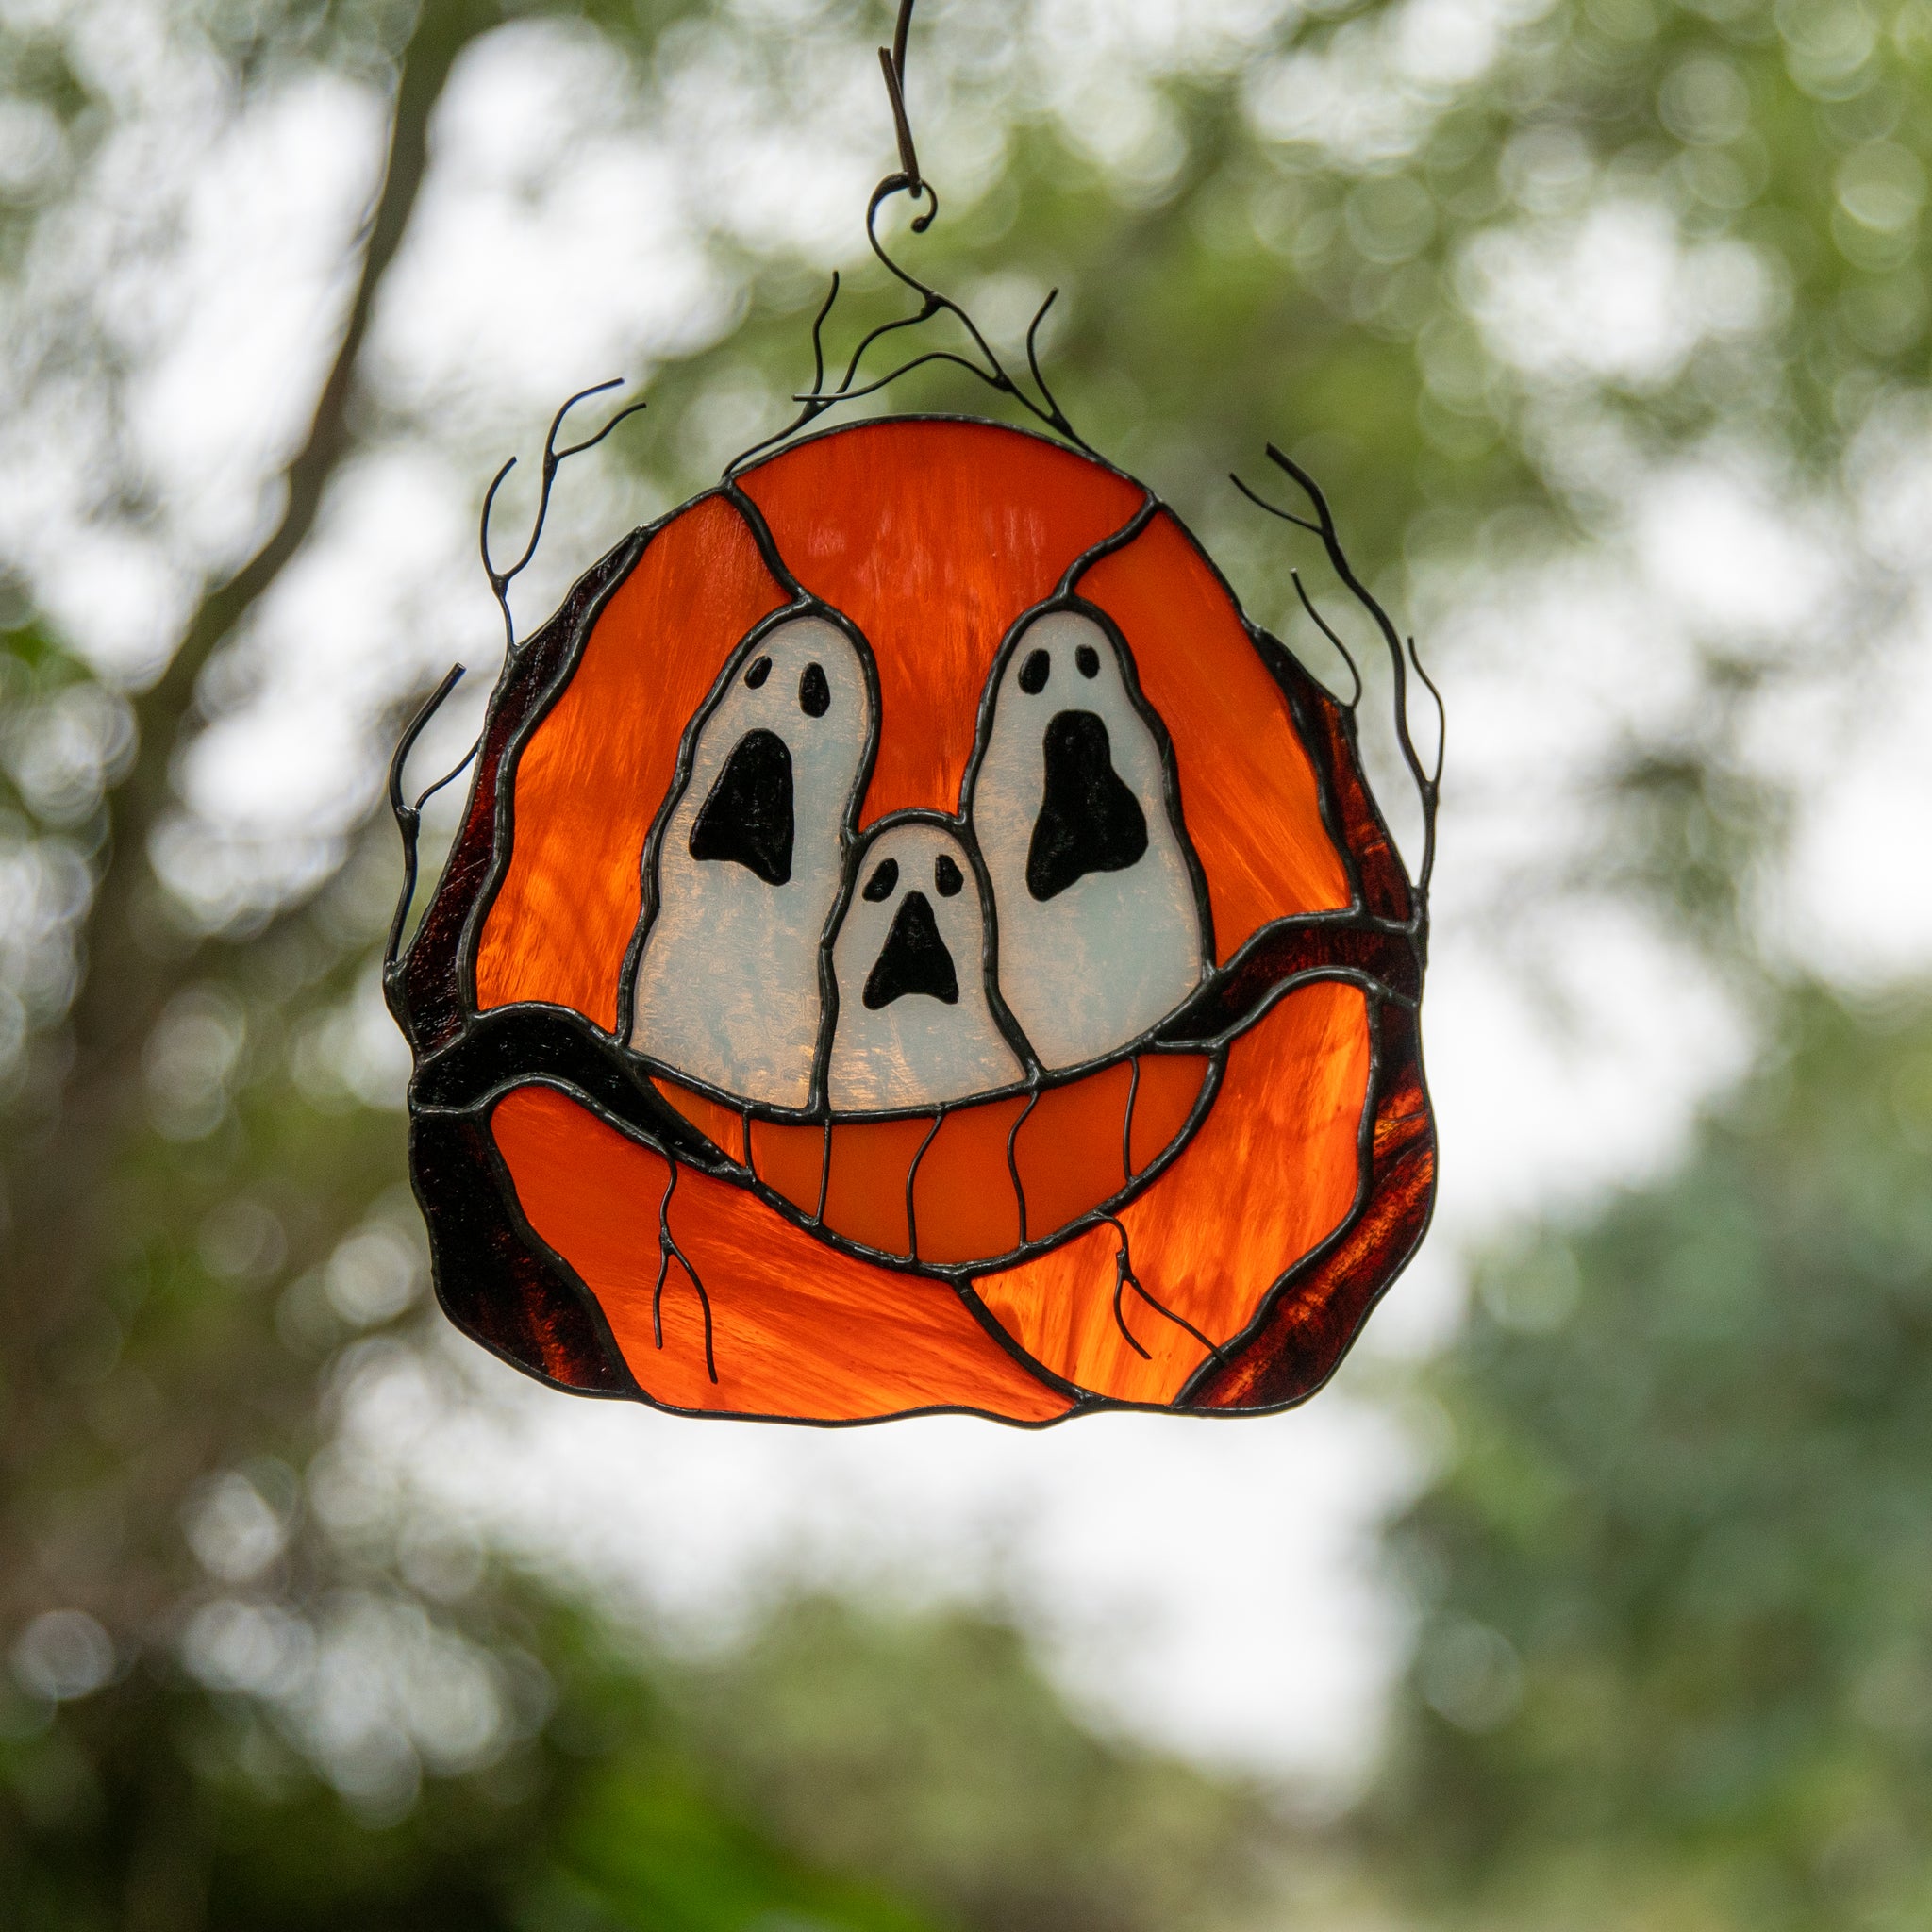 Halloween stained glass ghost-eyed pumpkin for creepy Halloween decor